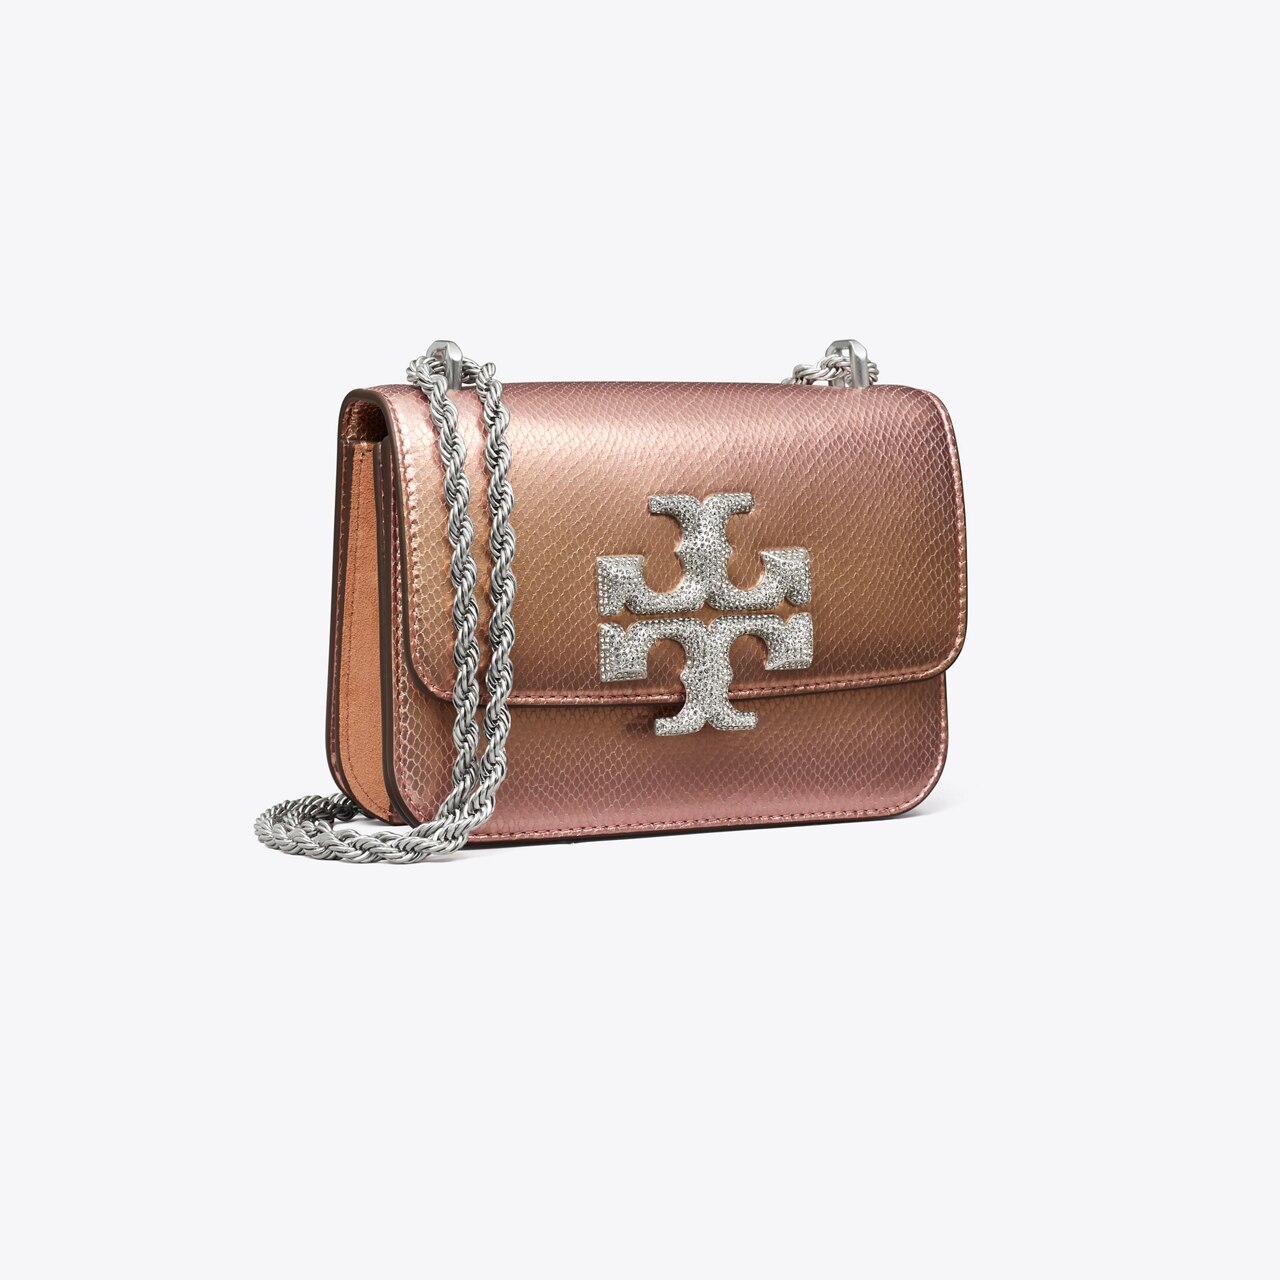 Tory Burch Eleanor Small Canvas & Leather Convertible Shoulder Bag